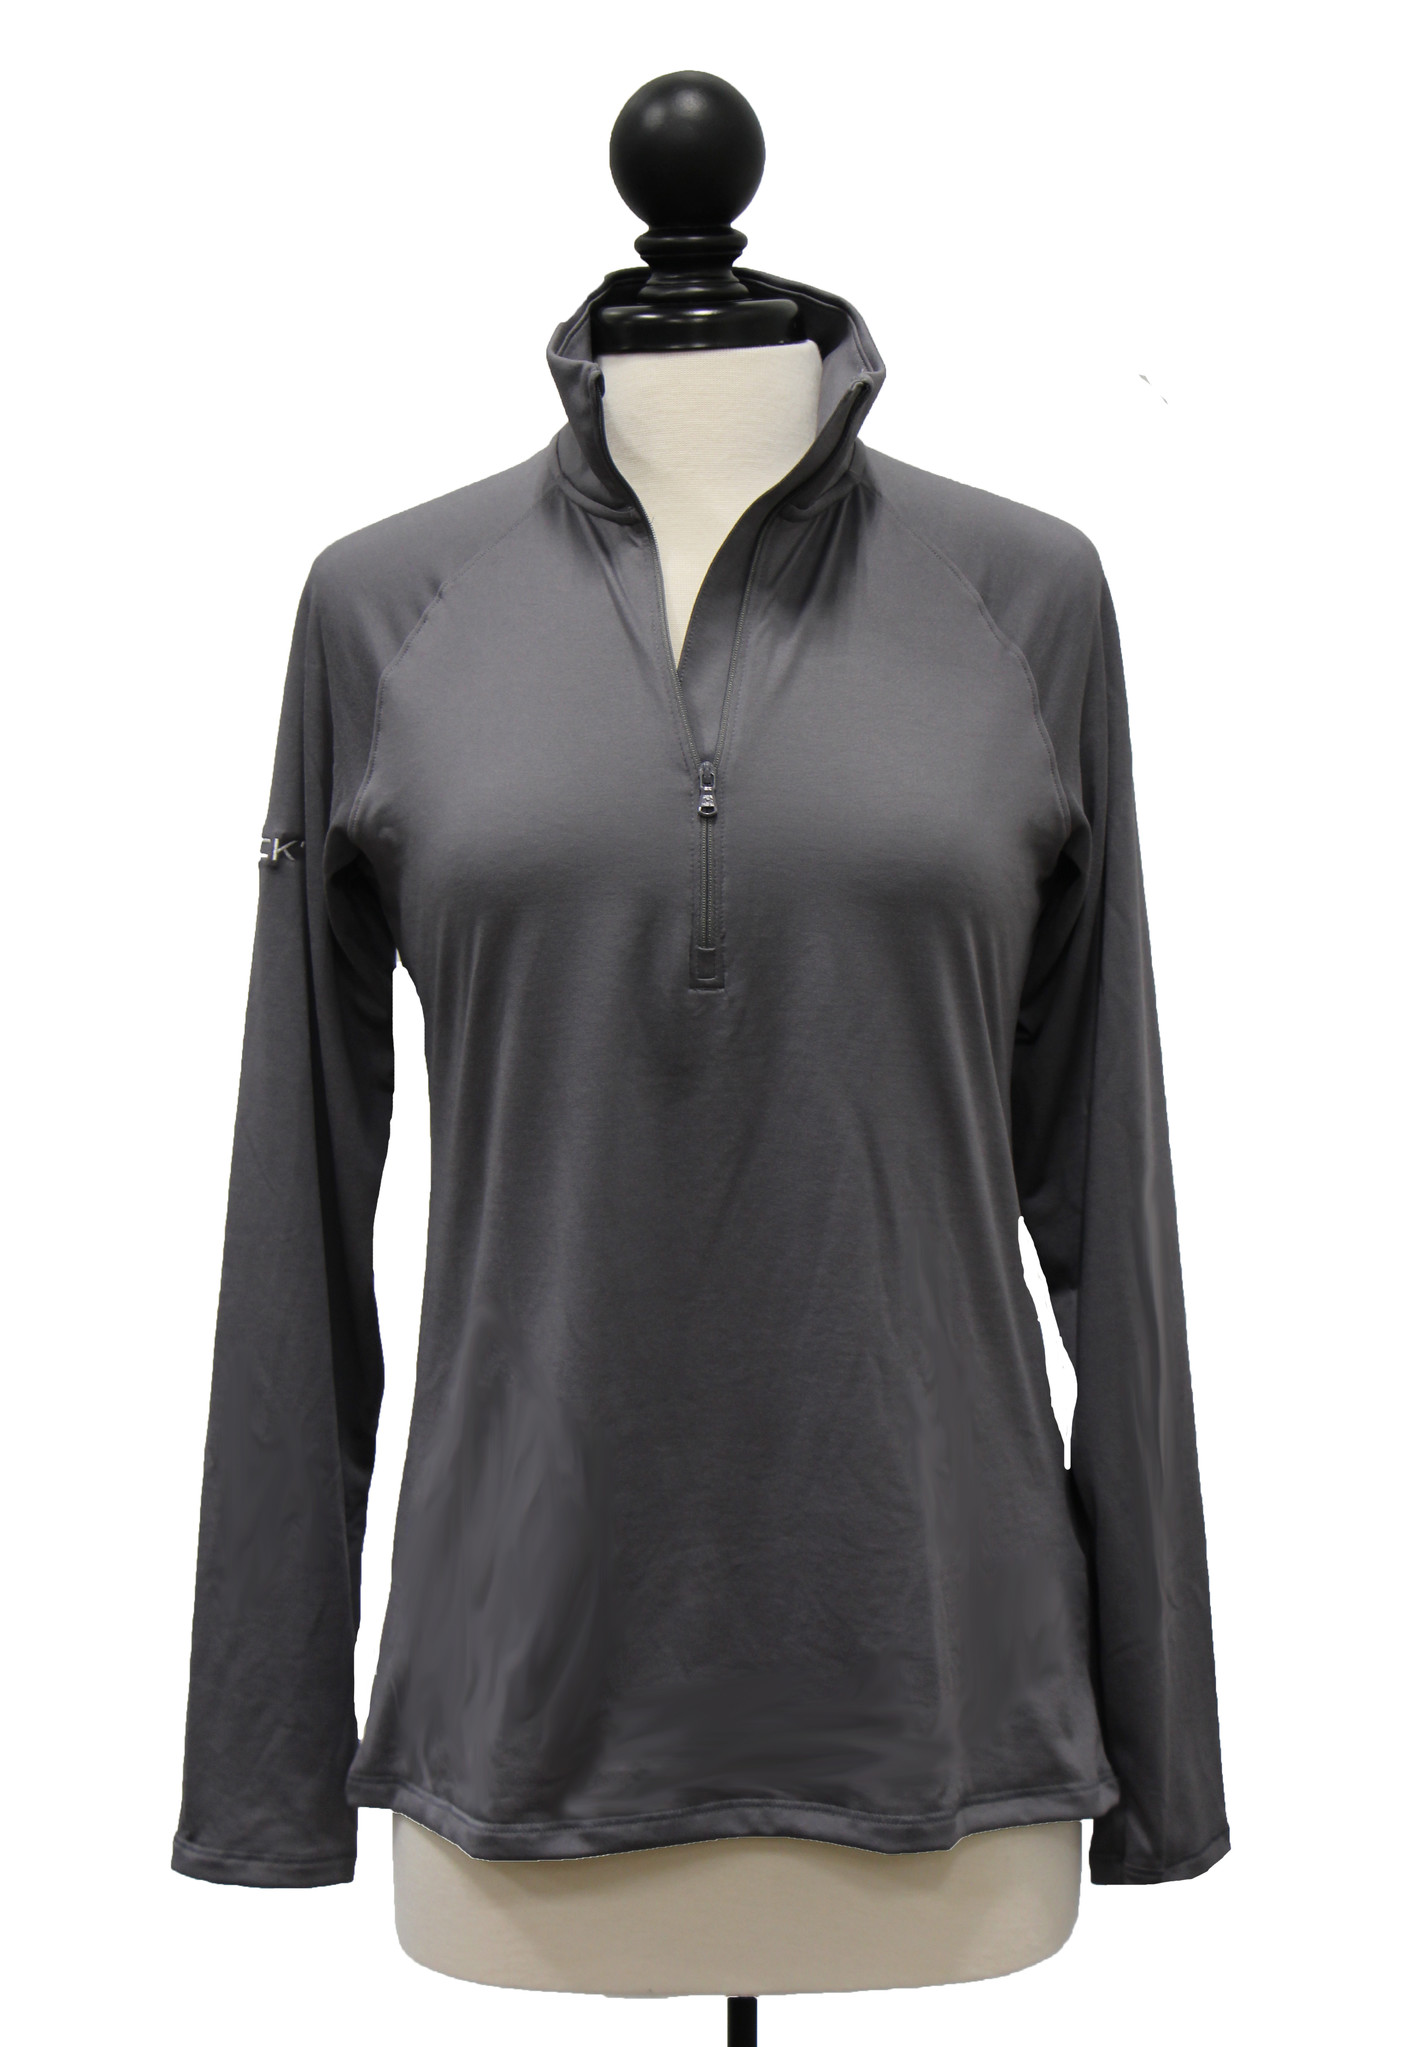 Under Armour Women's Under Armour Tech 1/4 Zip - Beck's Country Store